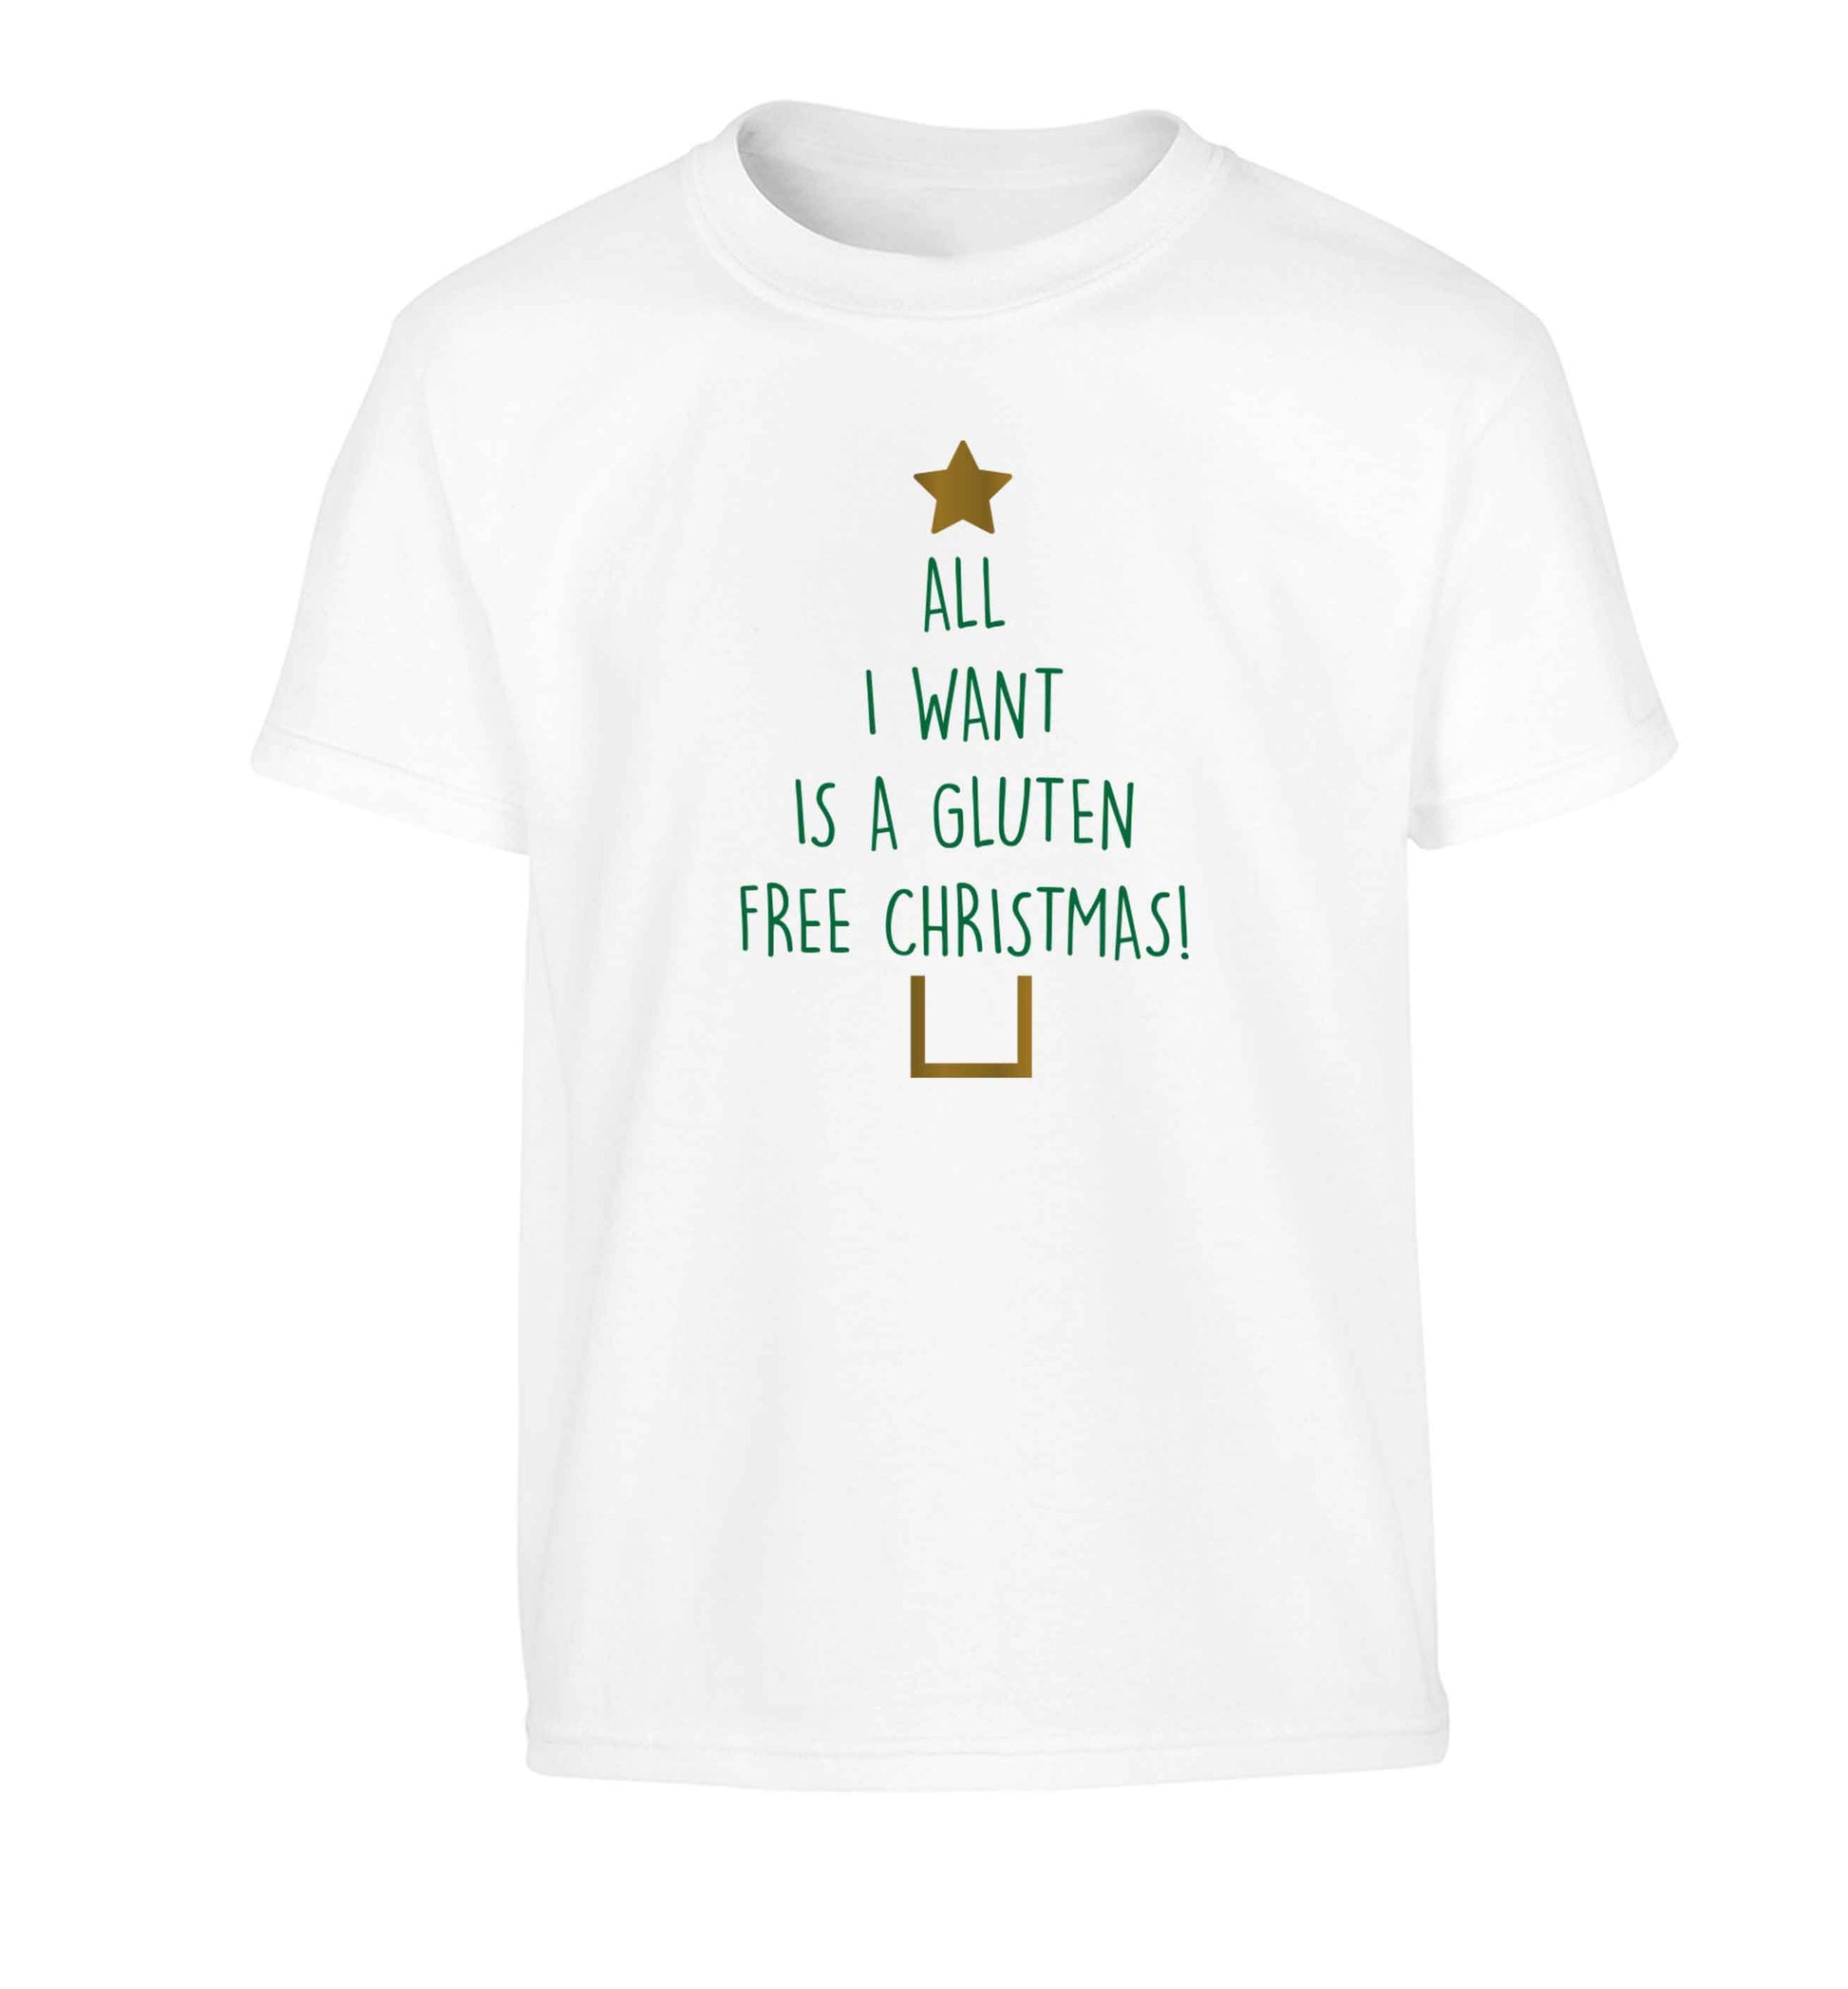 All I want is a gluten free Christmas Children's white Tshirt 12-13 Years